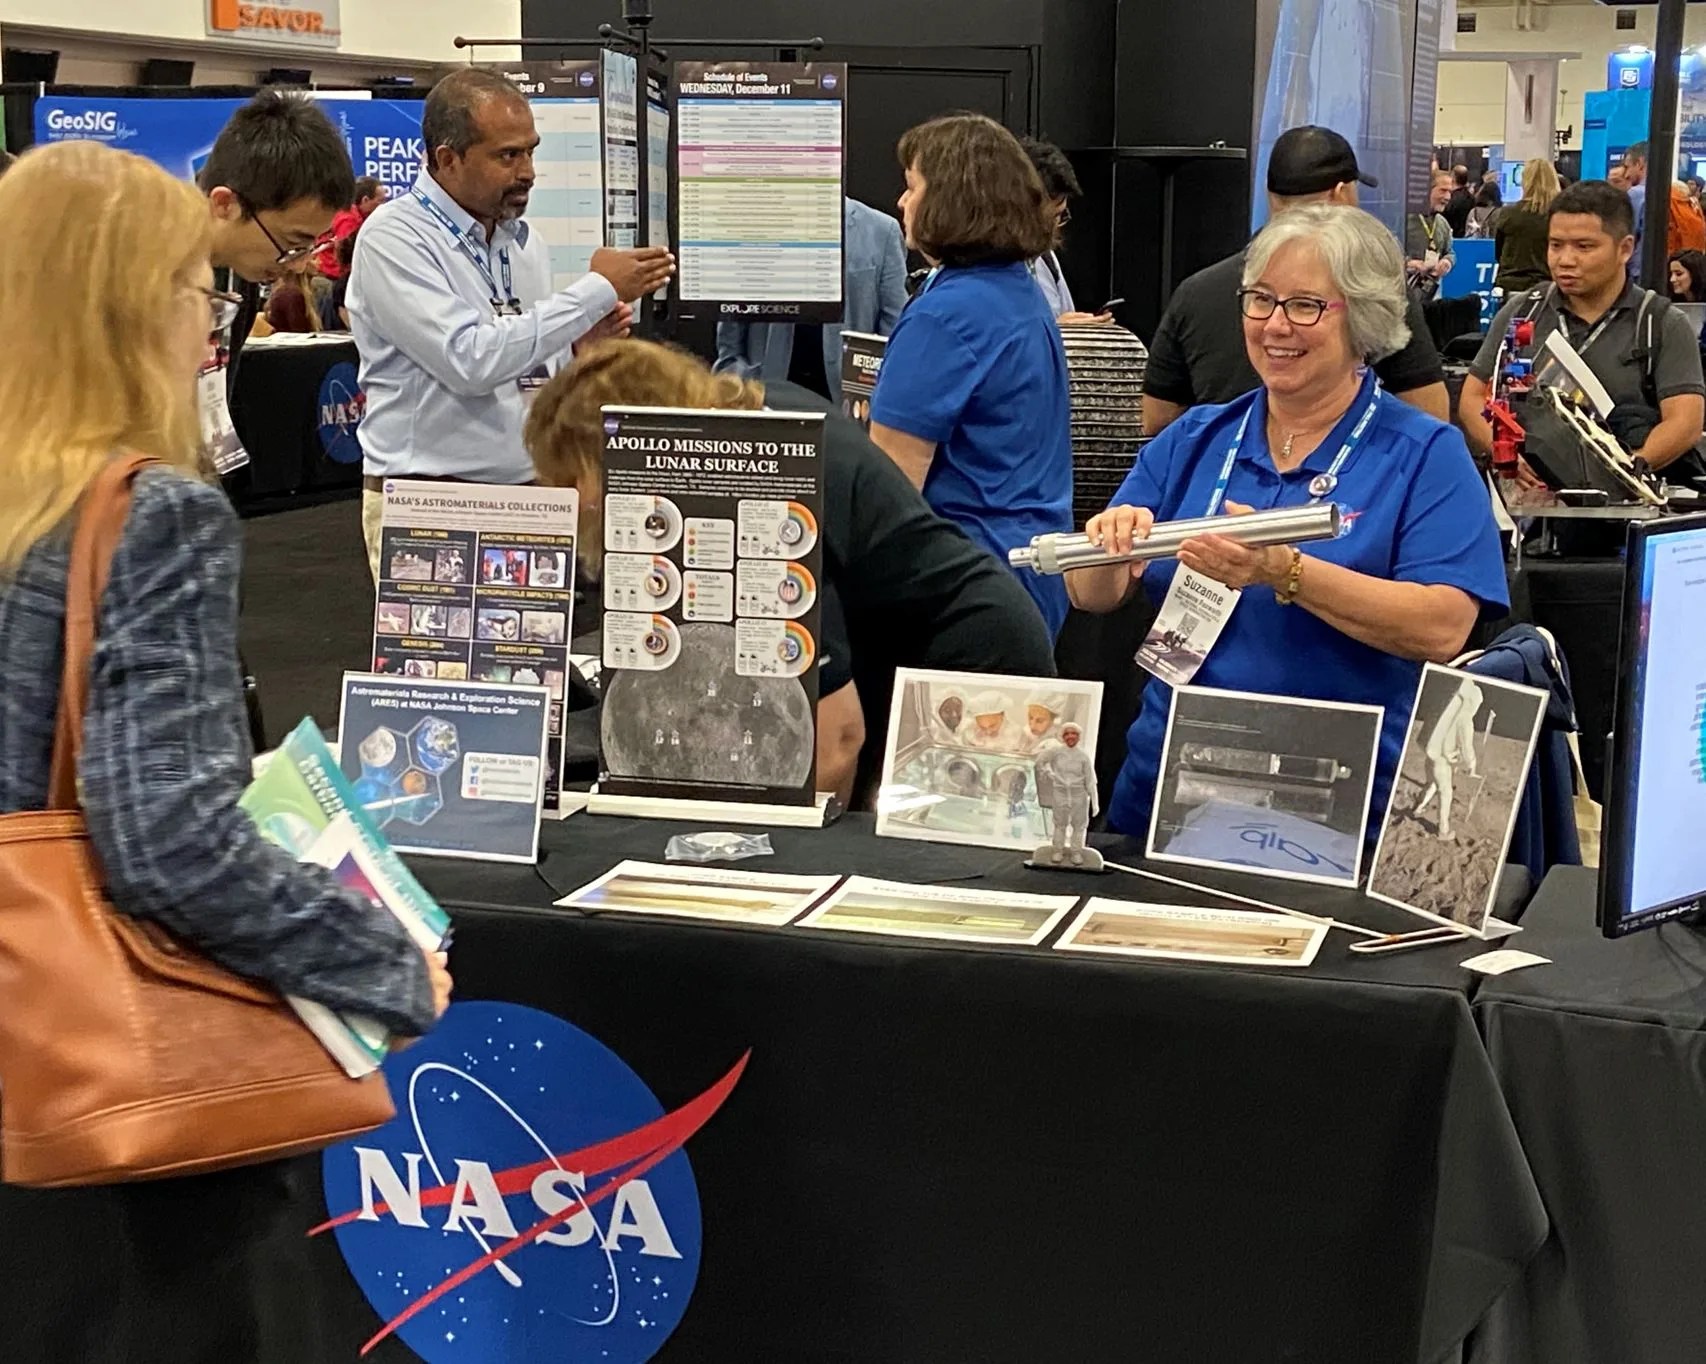 An ARES team member displays a replica of the ANGSA core tube at the NASA booth. The December 2019 AGU Meeting took place at the Moscone Center in San Francisco.